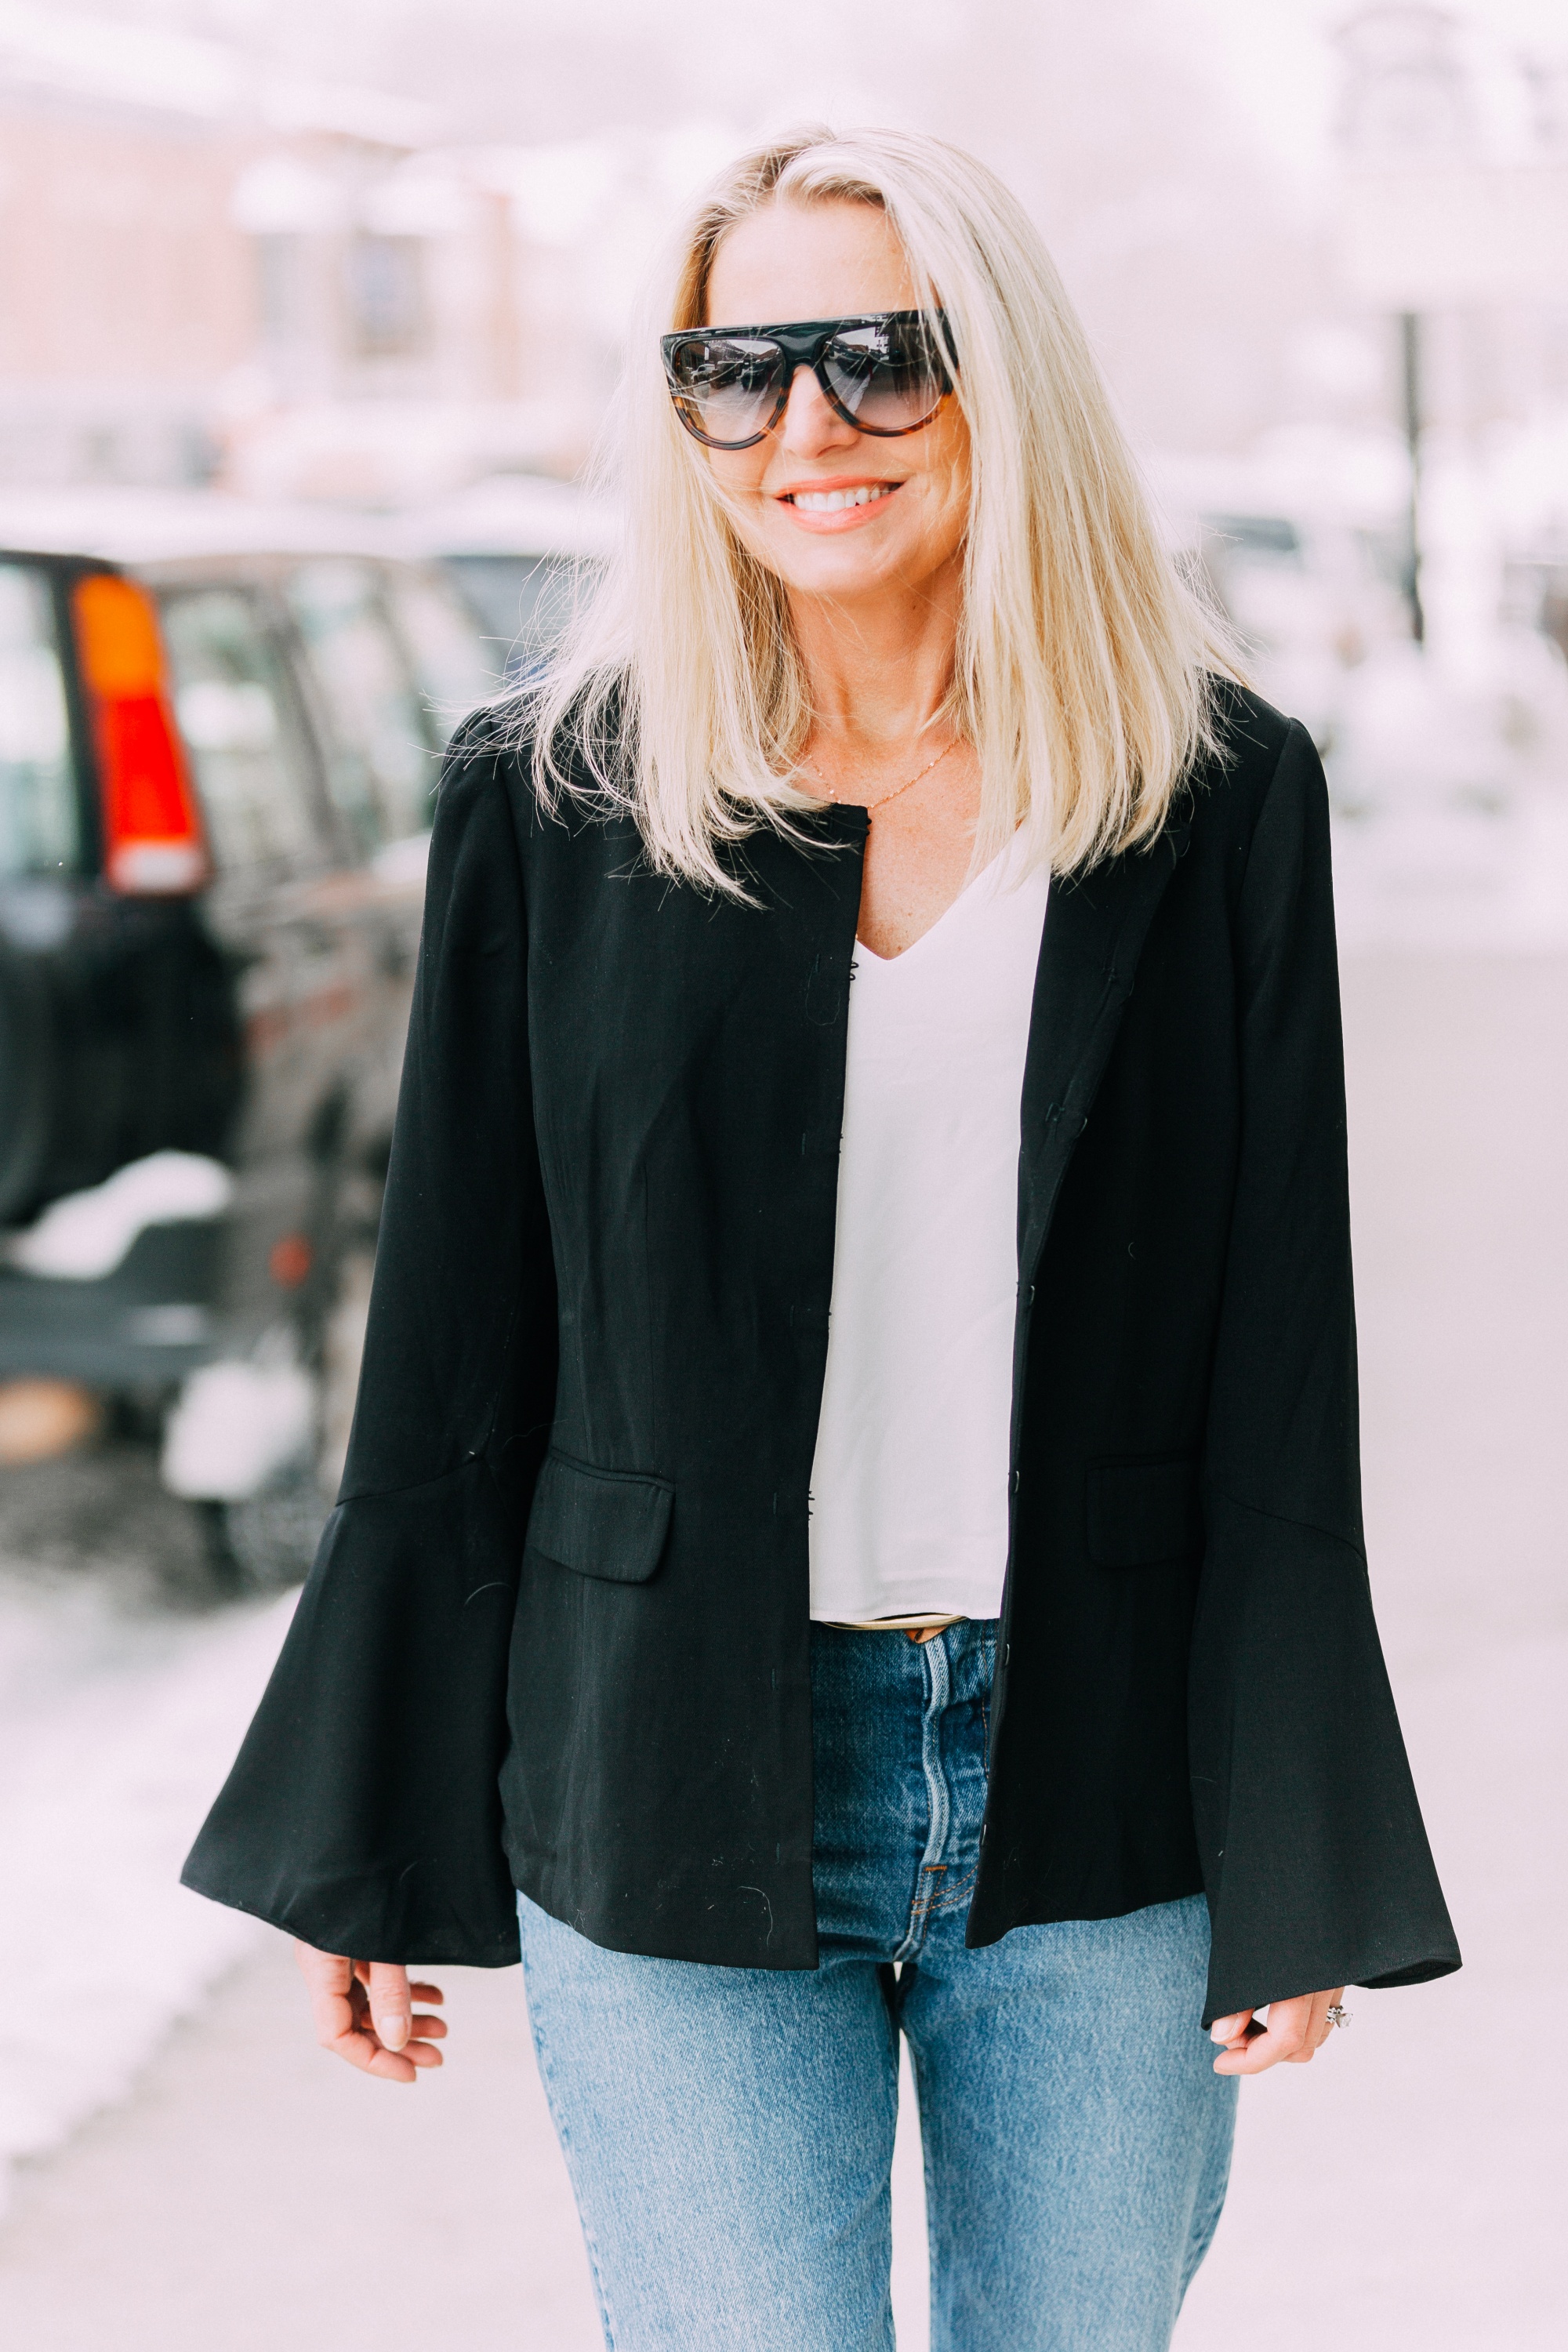 Spring Fashion, Fashion blogger Erin Busbee of BusbeeStyle.com wearing Le Gali black flare sleeve jacket, Levi jeans, AQUA tank, and Via Spiga white mules from Bloomingdale's walking in Telluride, CO